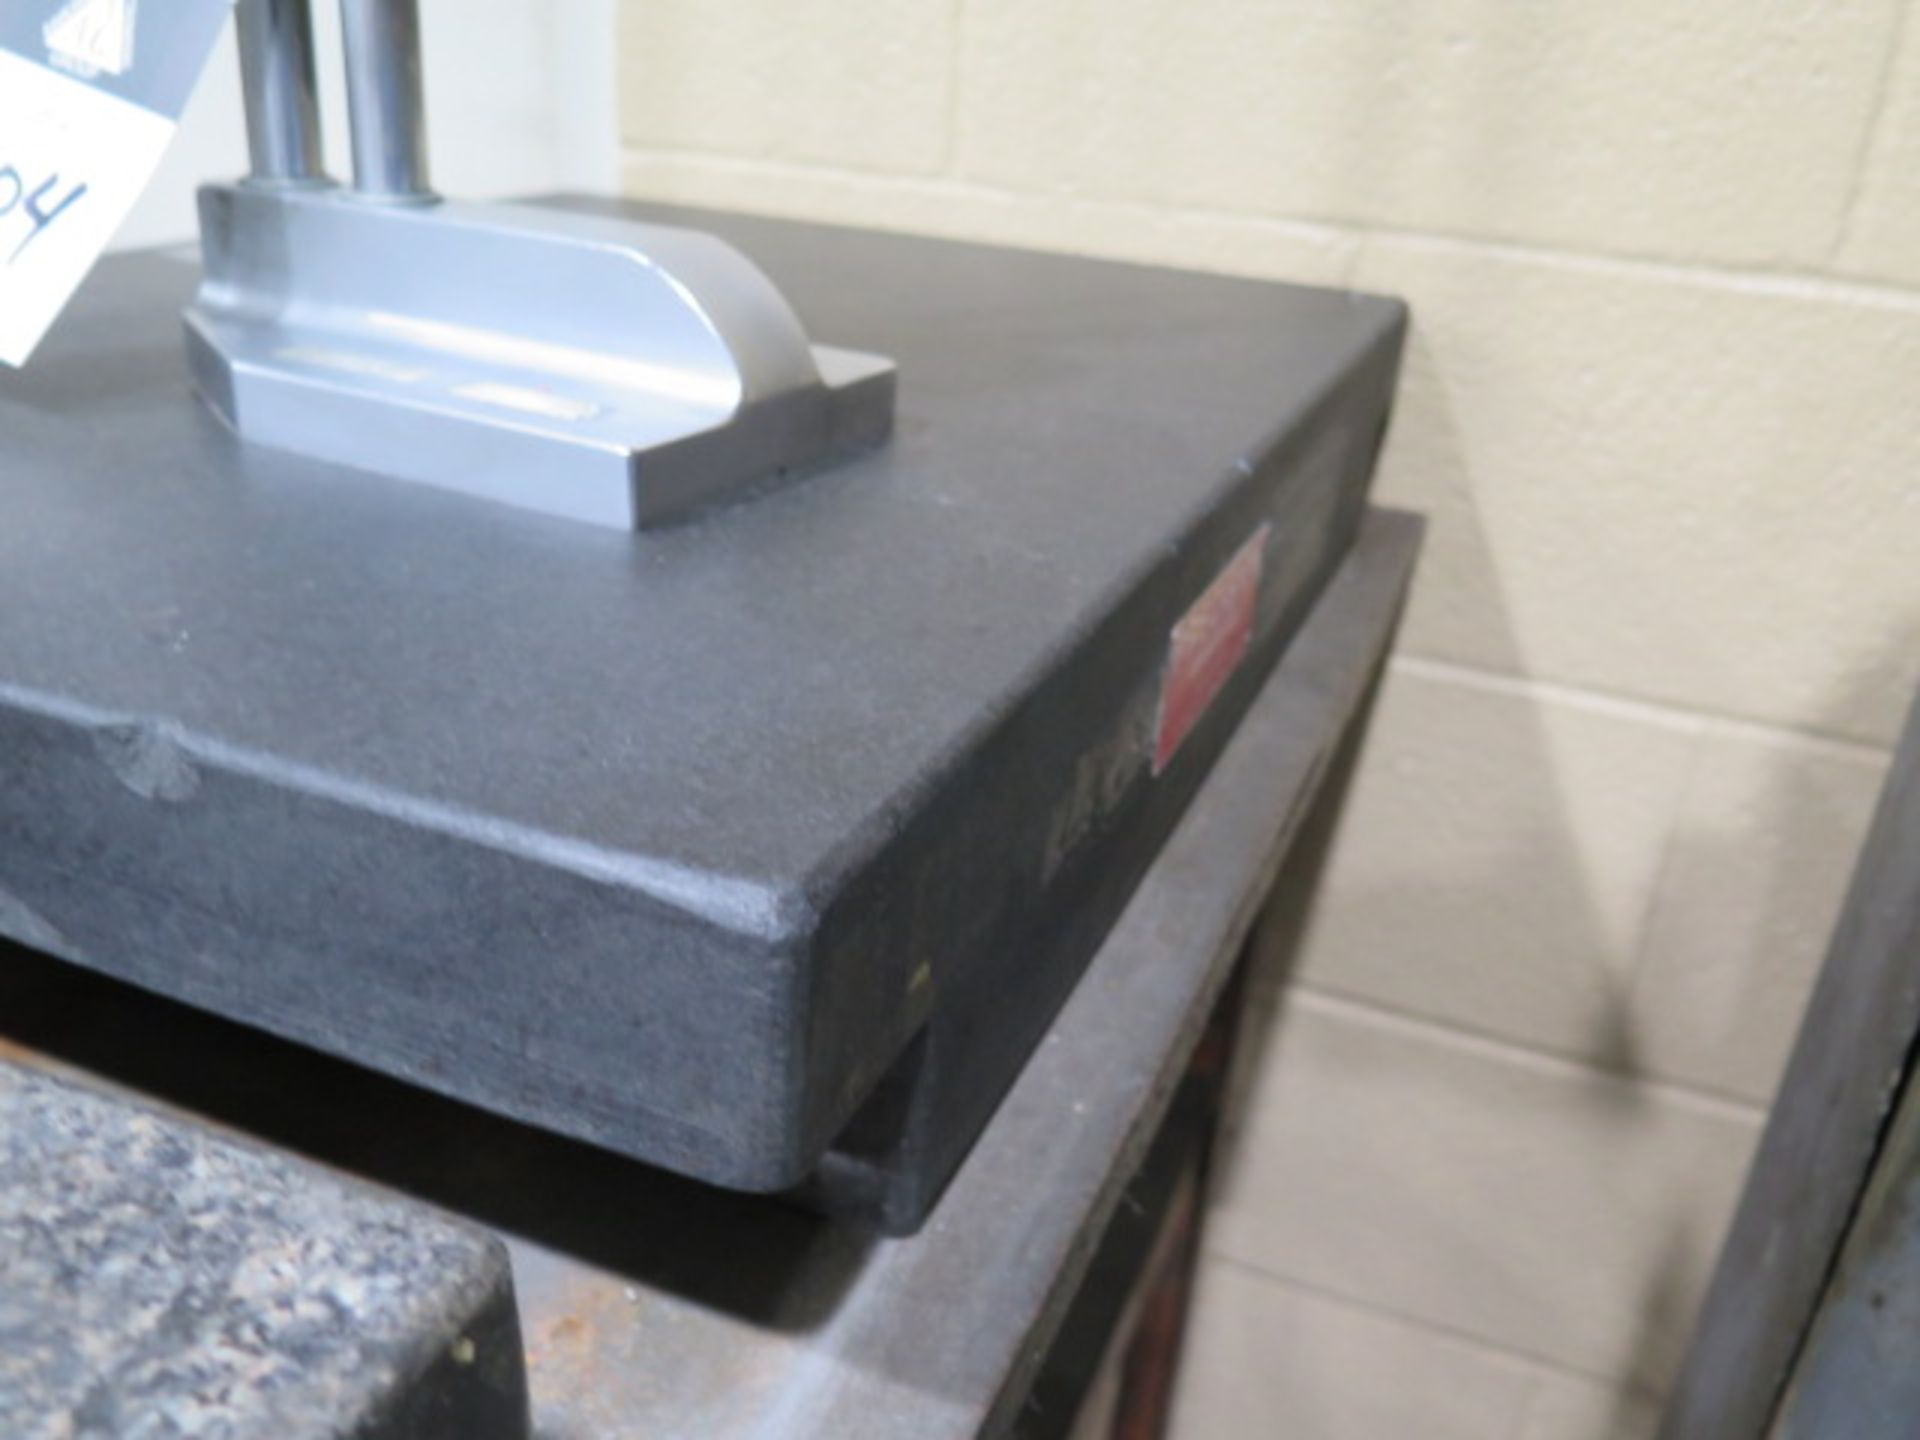 DoAll 18" x 24" x 4" 2-Ledge Granite Surface Plate w/ Rolling Stand (SOLD AS-IS - NO WARRANTY) - Image 2 of 5